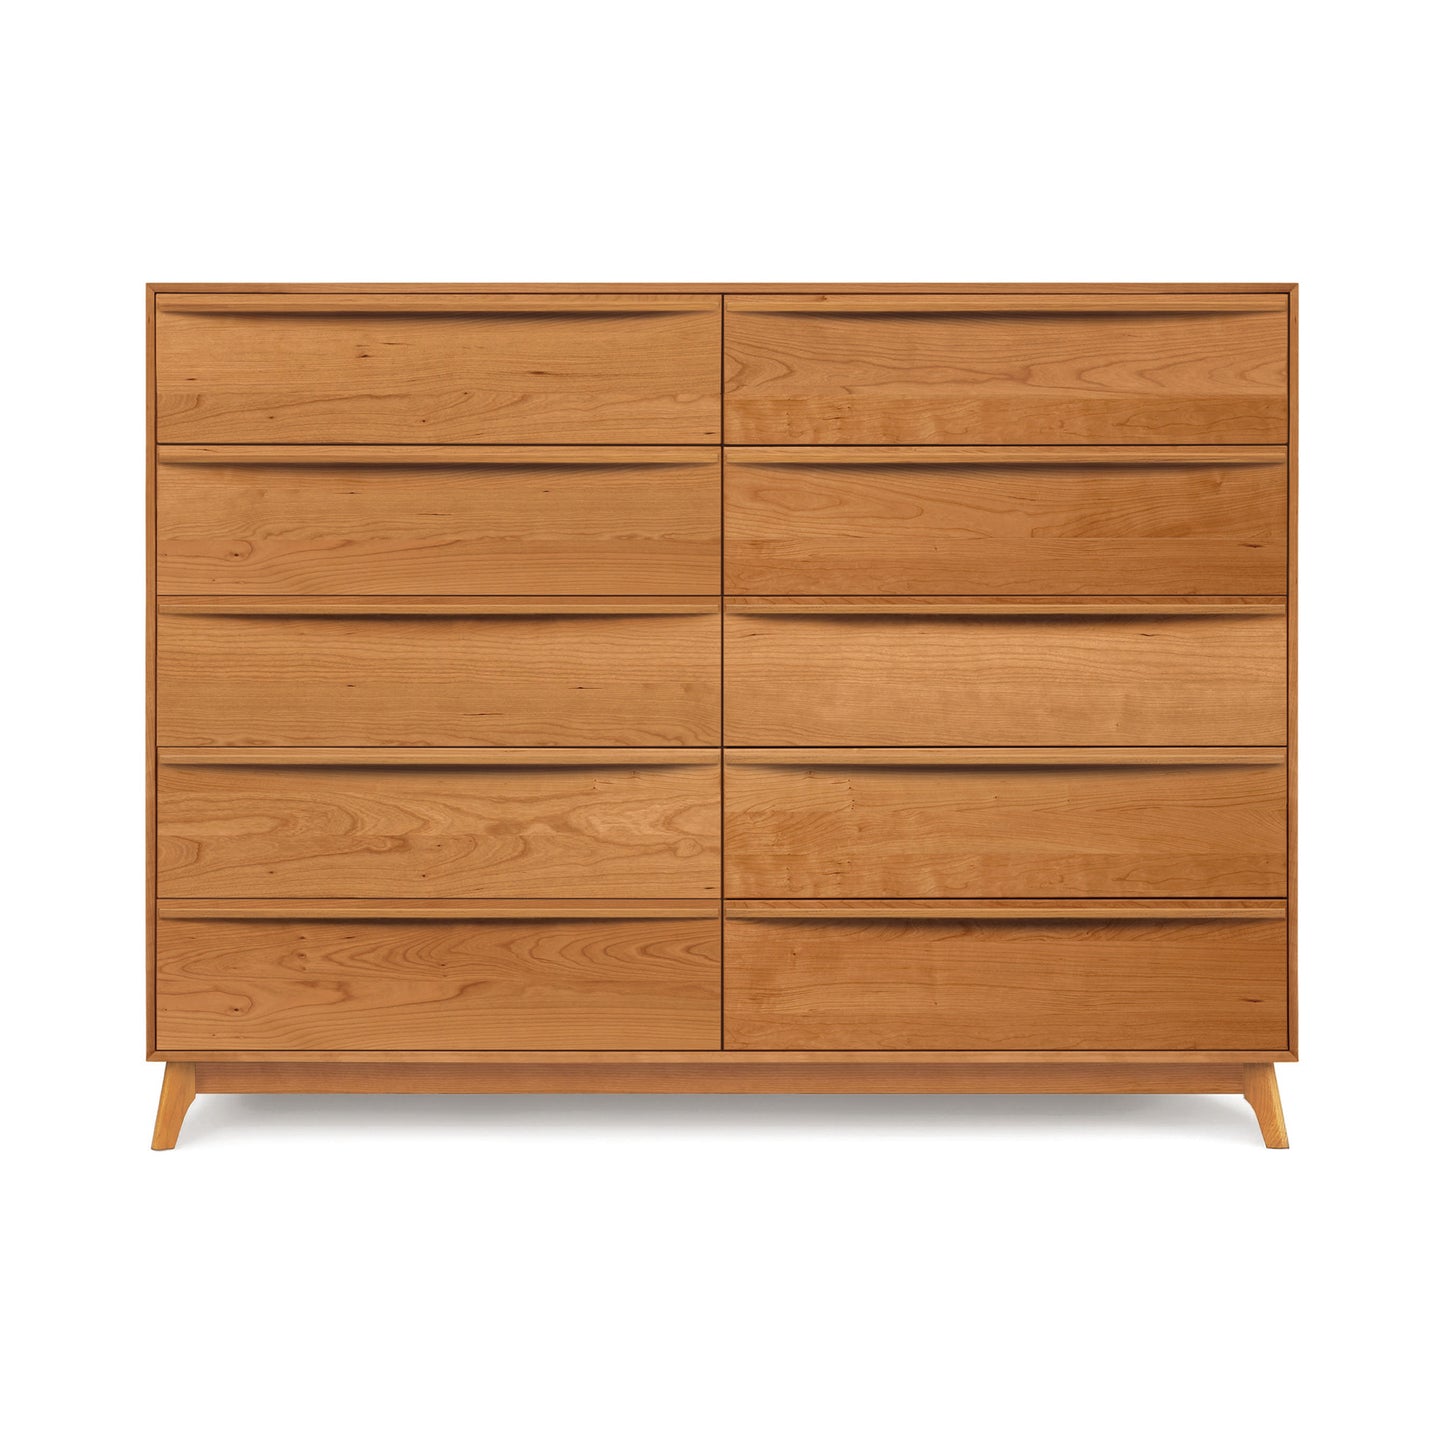 A Catalina 10-Drawer Dresser by Copeland Furniture against a white background, perfect for bedroom storage.